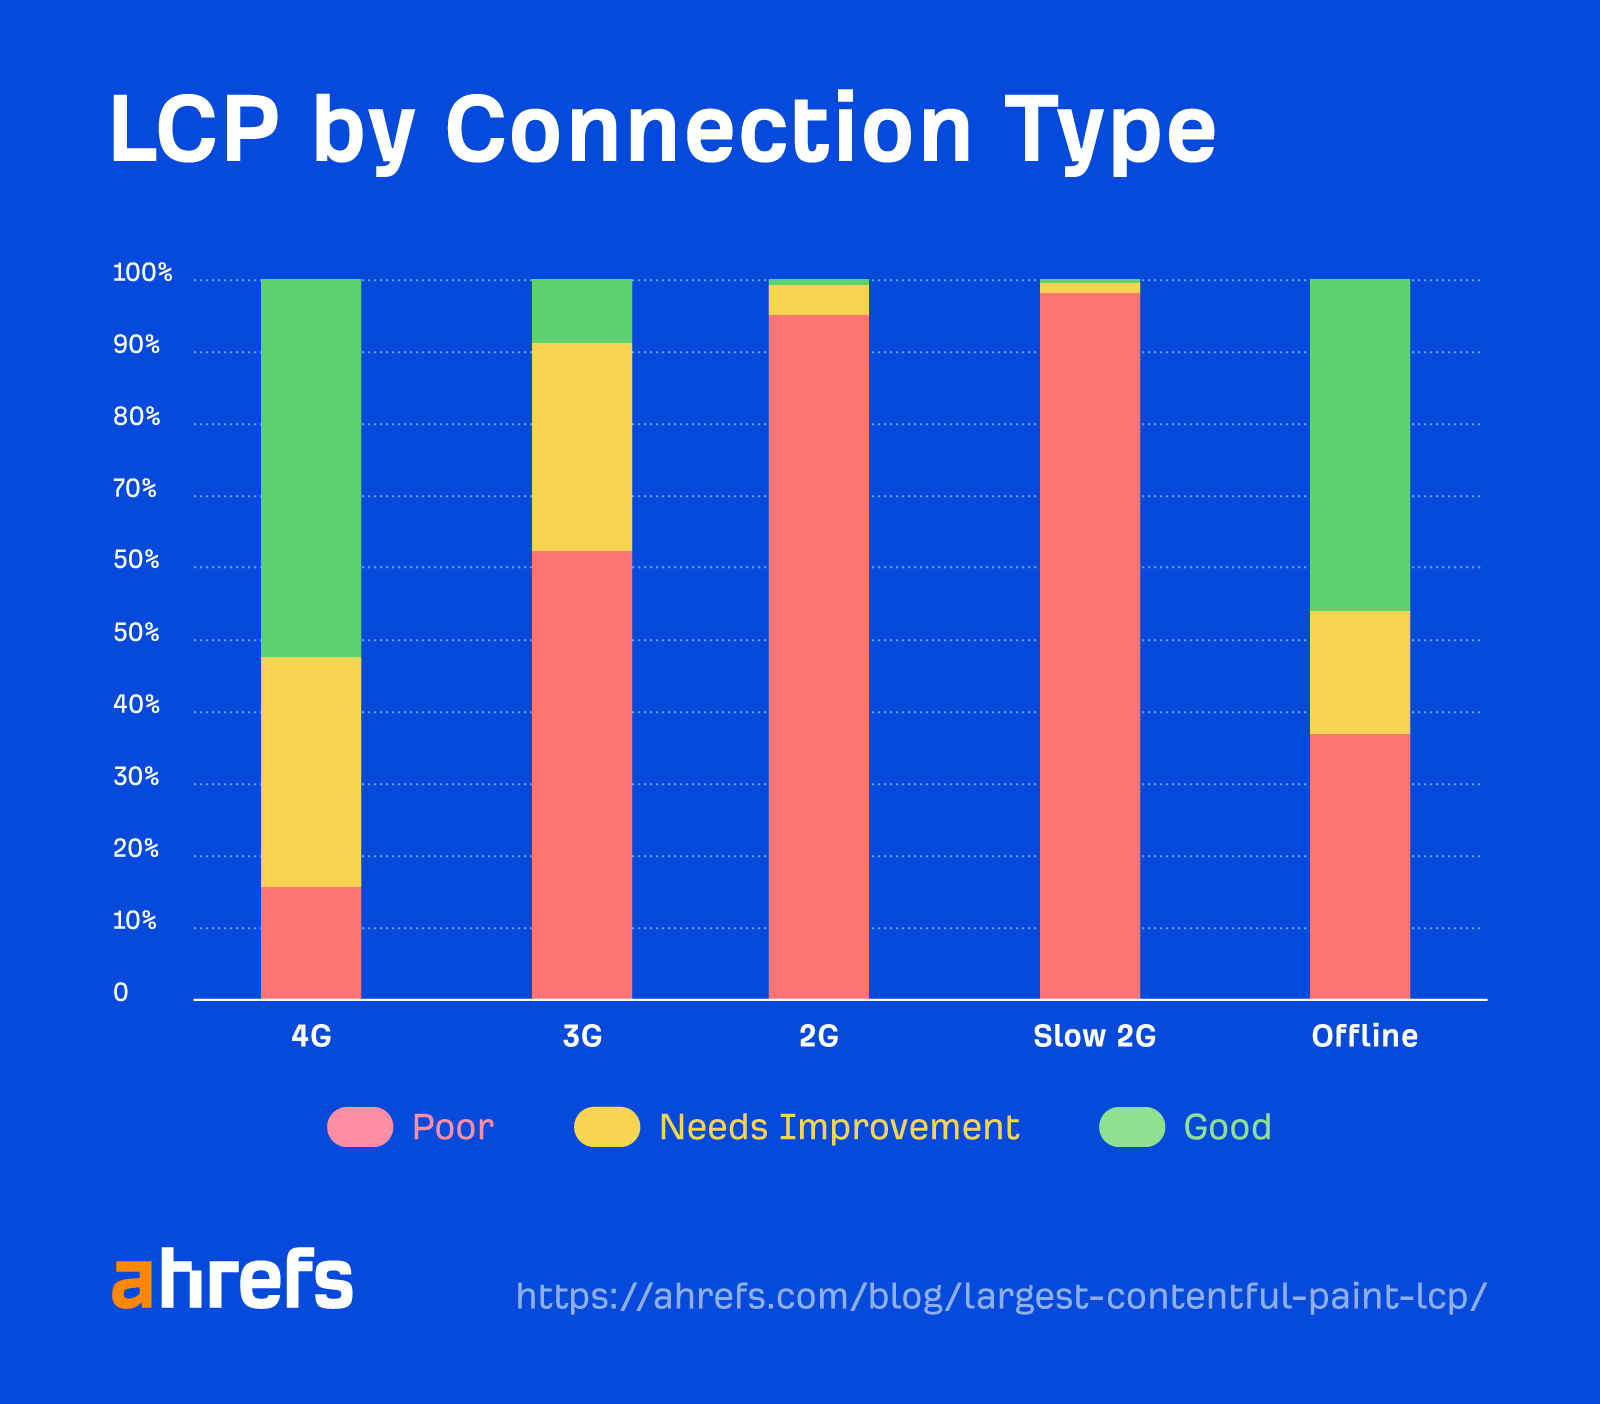 Breakdown of LCP by connection type